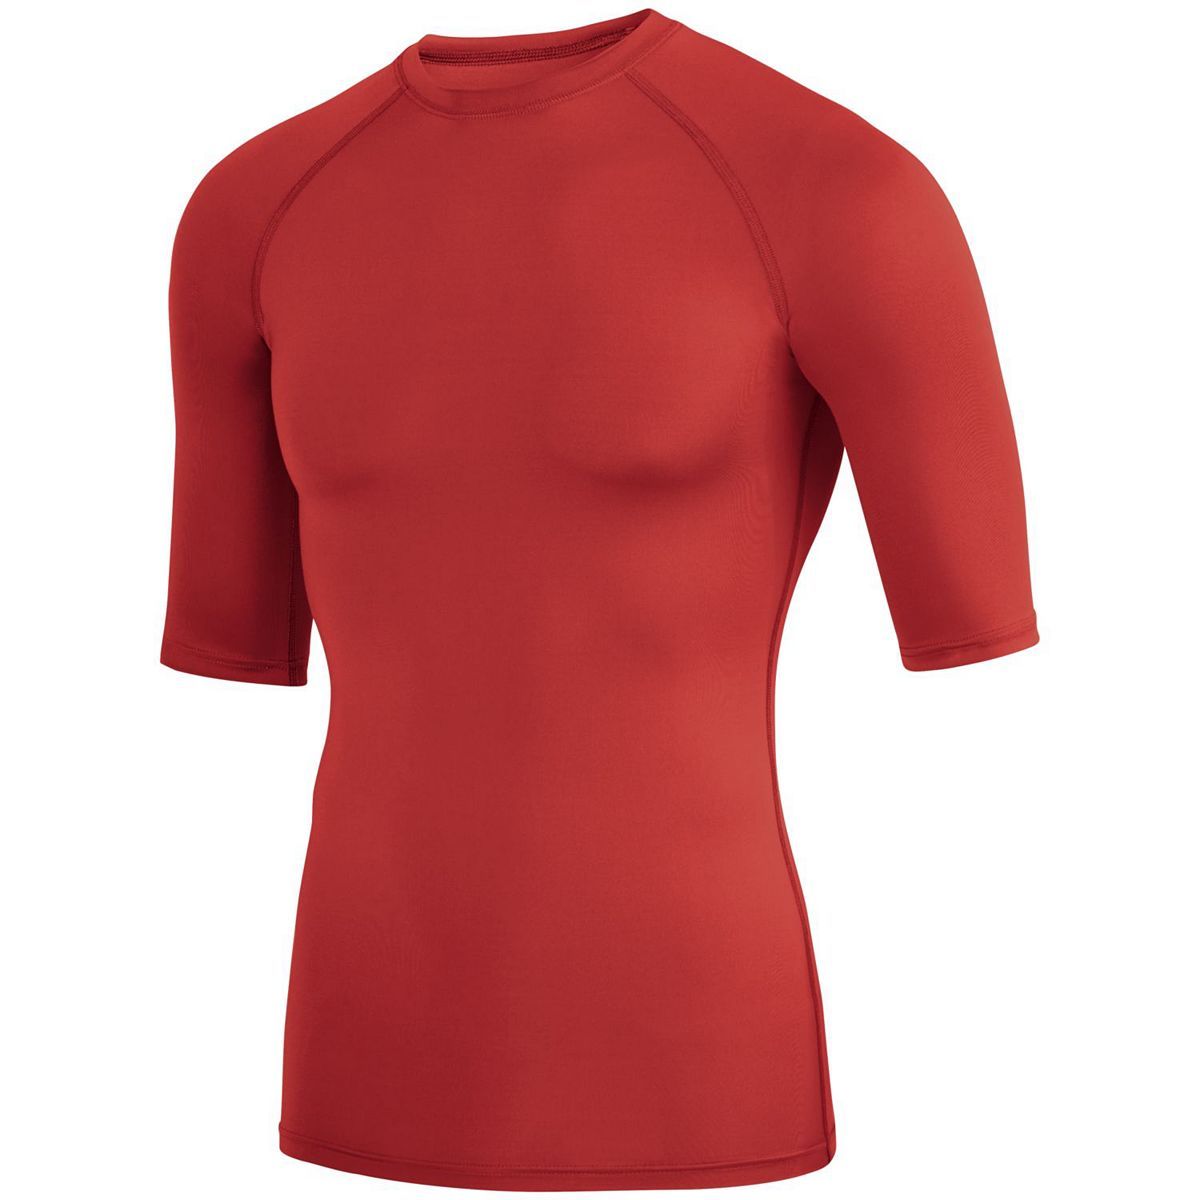 Augusta Sportswear Youth Hyperform Compression Half Sleeve Tee in Red  -Part of the Youth, Youth-Tee-Shirt, T-Shirts, Augusta-Products, Shirts product lines at KanaleyCreations.com